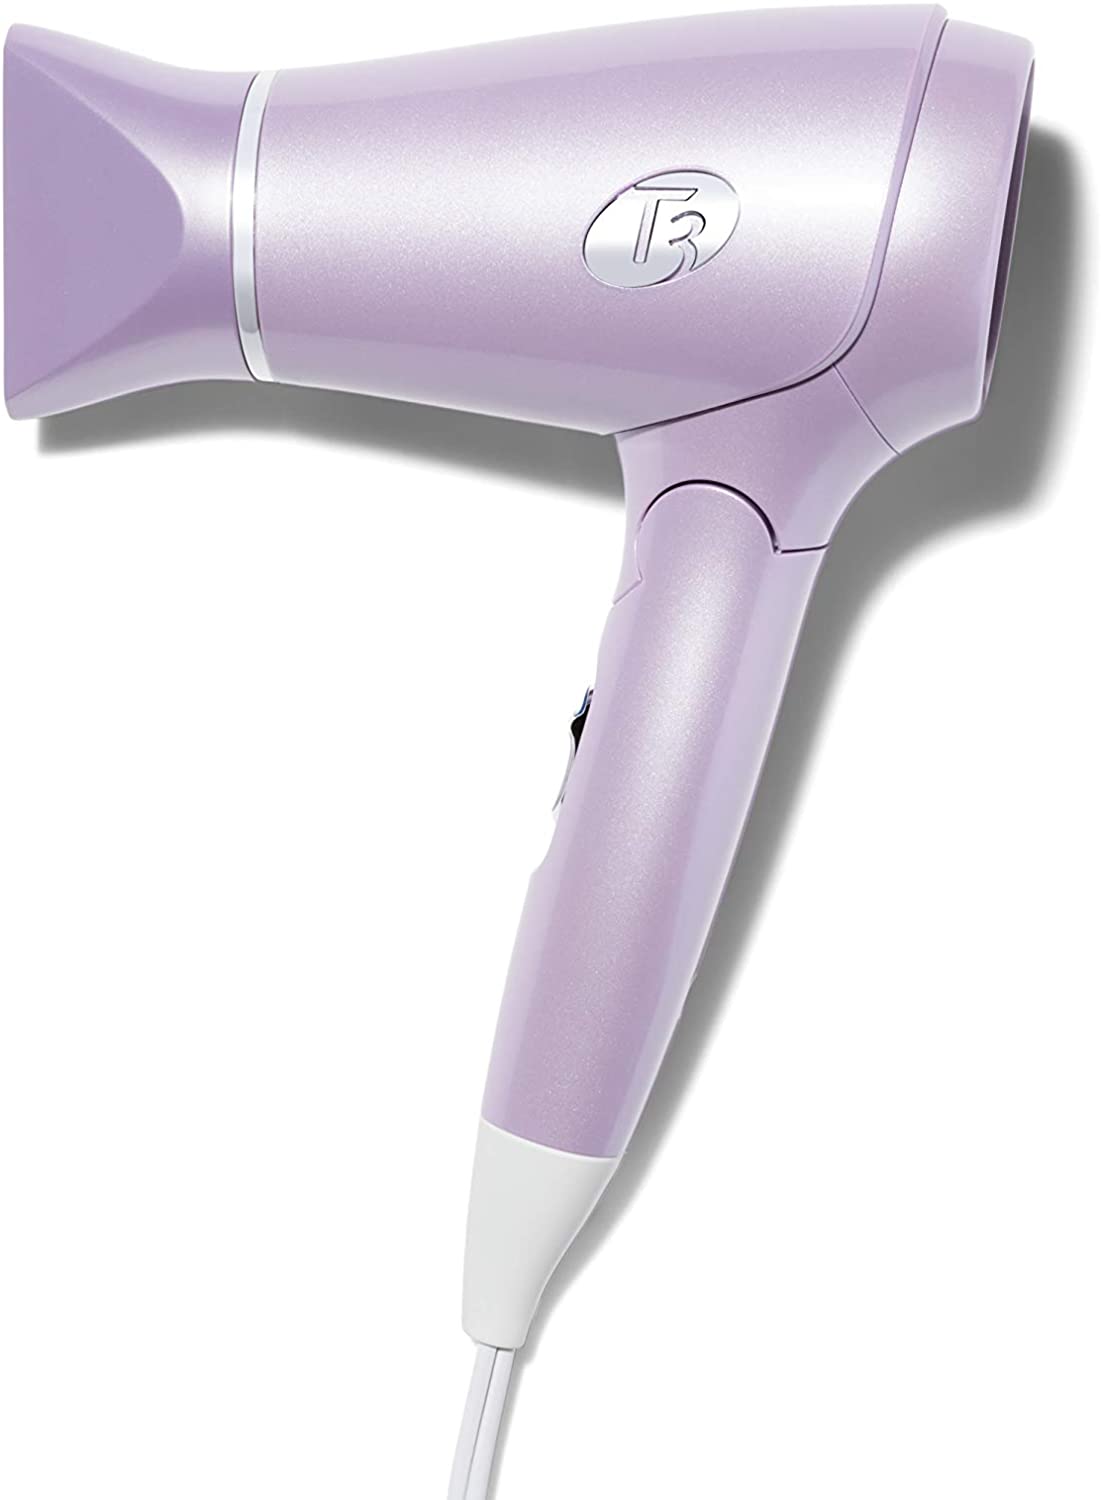 T3 Lavender Micro Compact Travel Hair Dryer